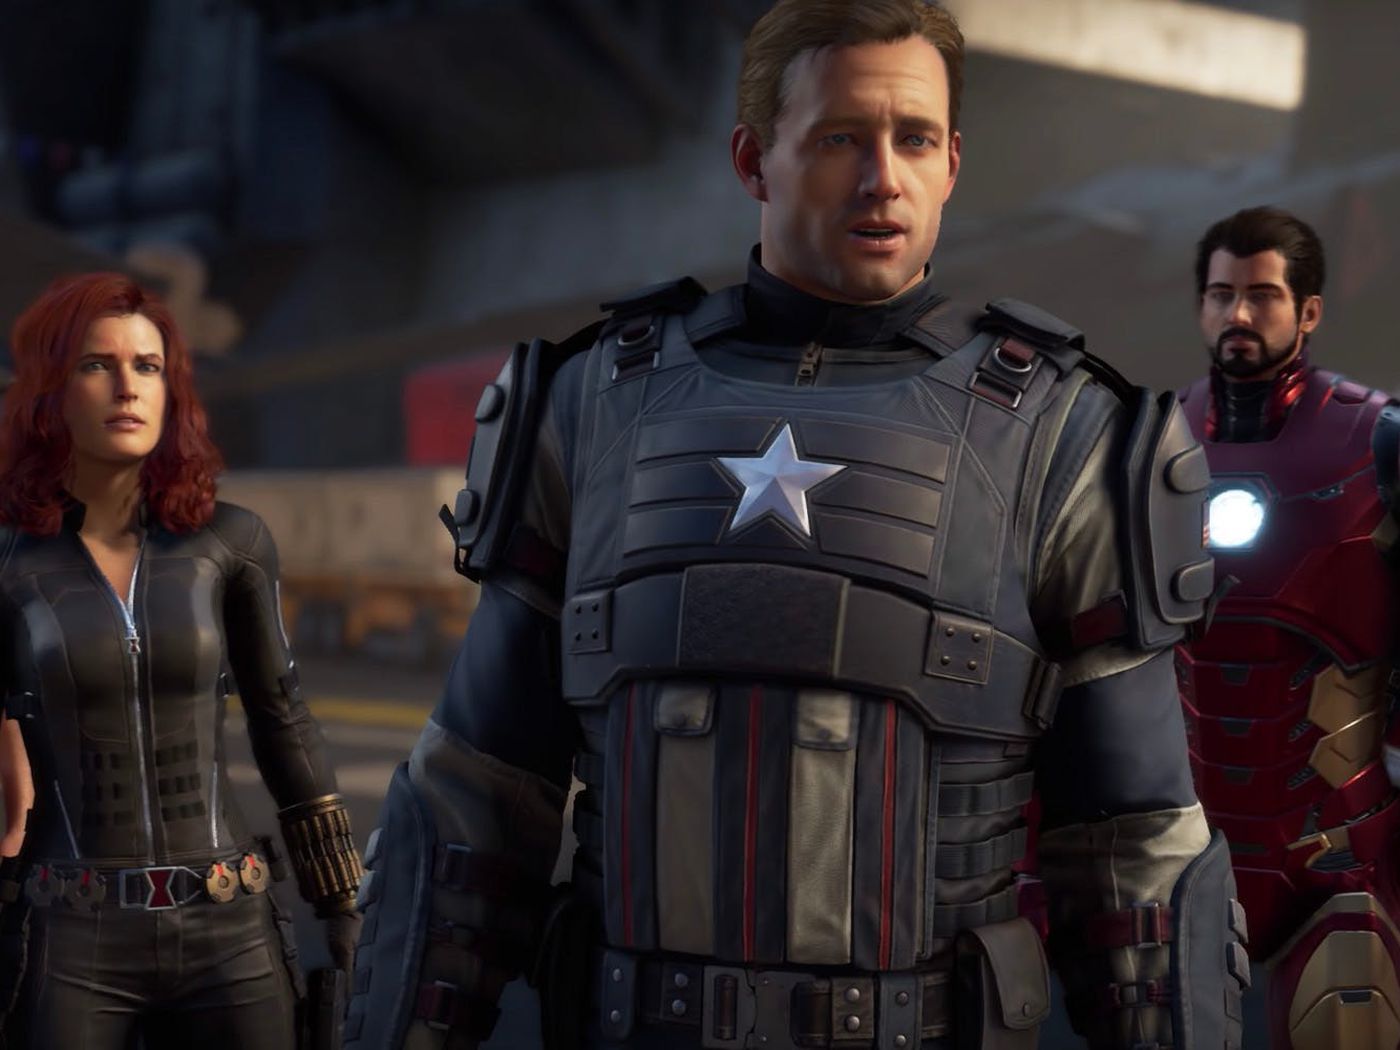 Why The Avengers video game has the same superheroes as the movie